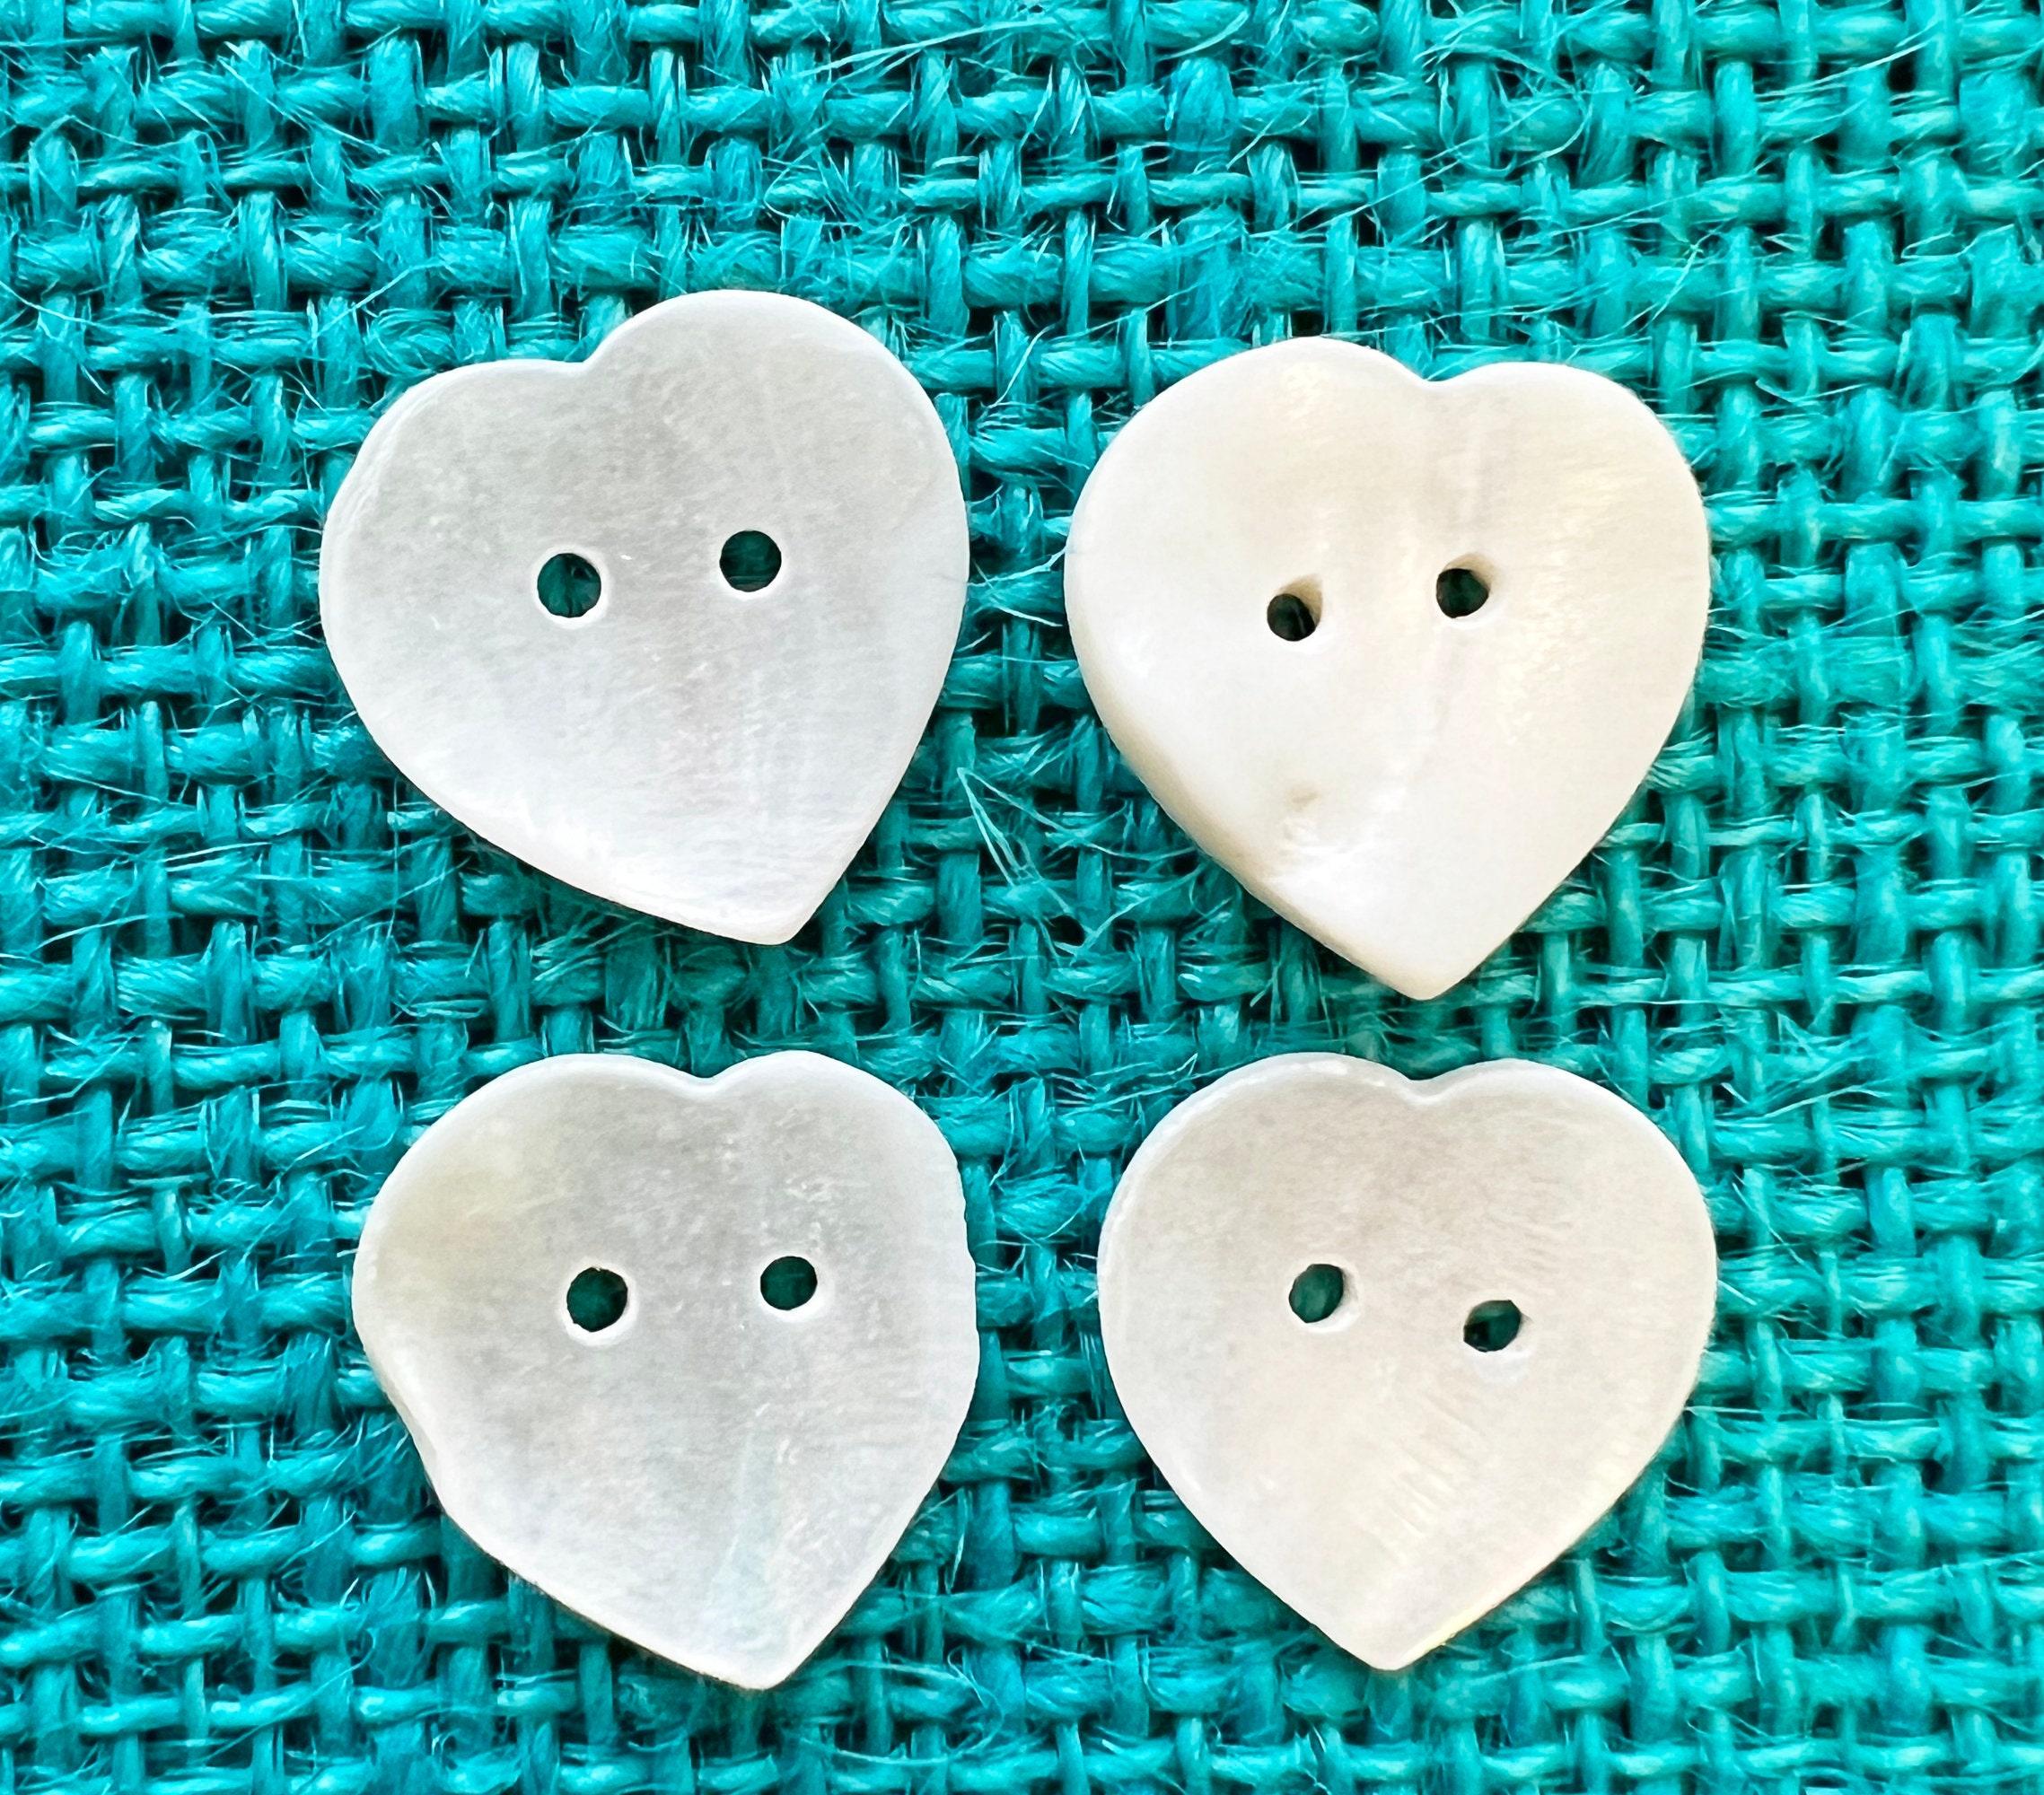 Meetppy Guzon 200pcs 14mm Heart Shaped Multicolor 2 Holes Plastic Sewing Buttons for Sewing Scrapbooking Knitting